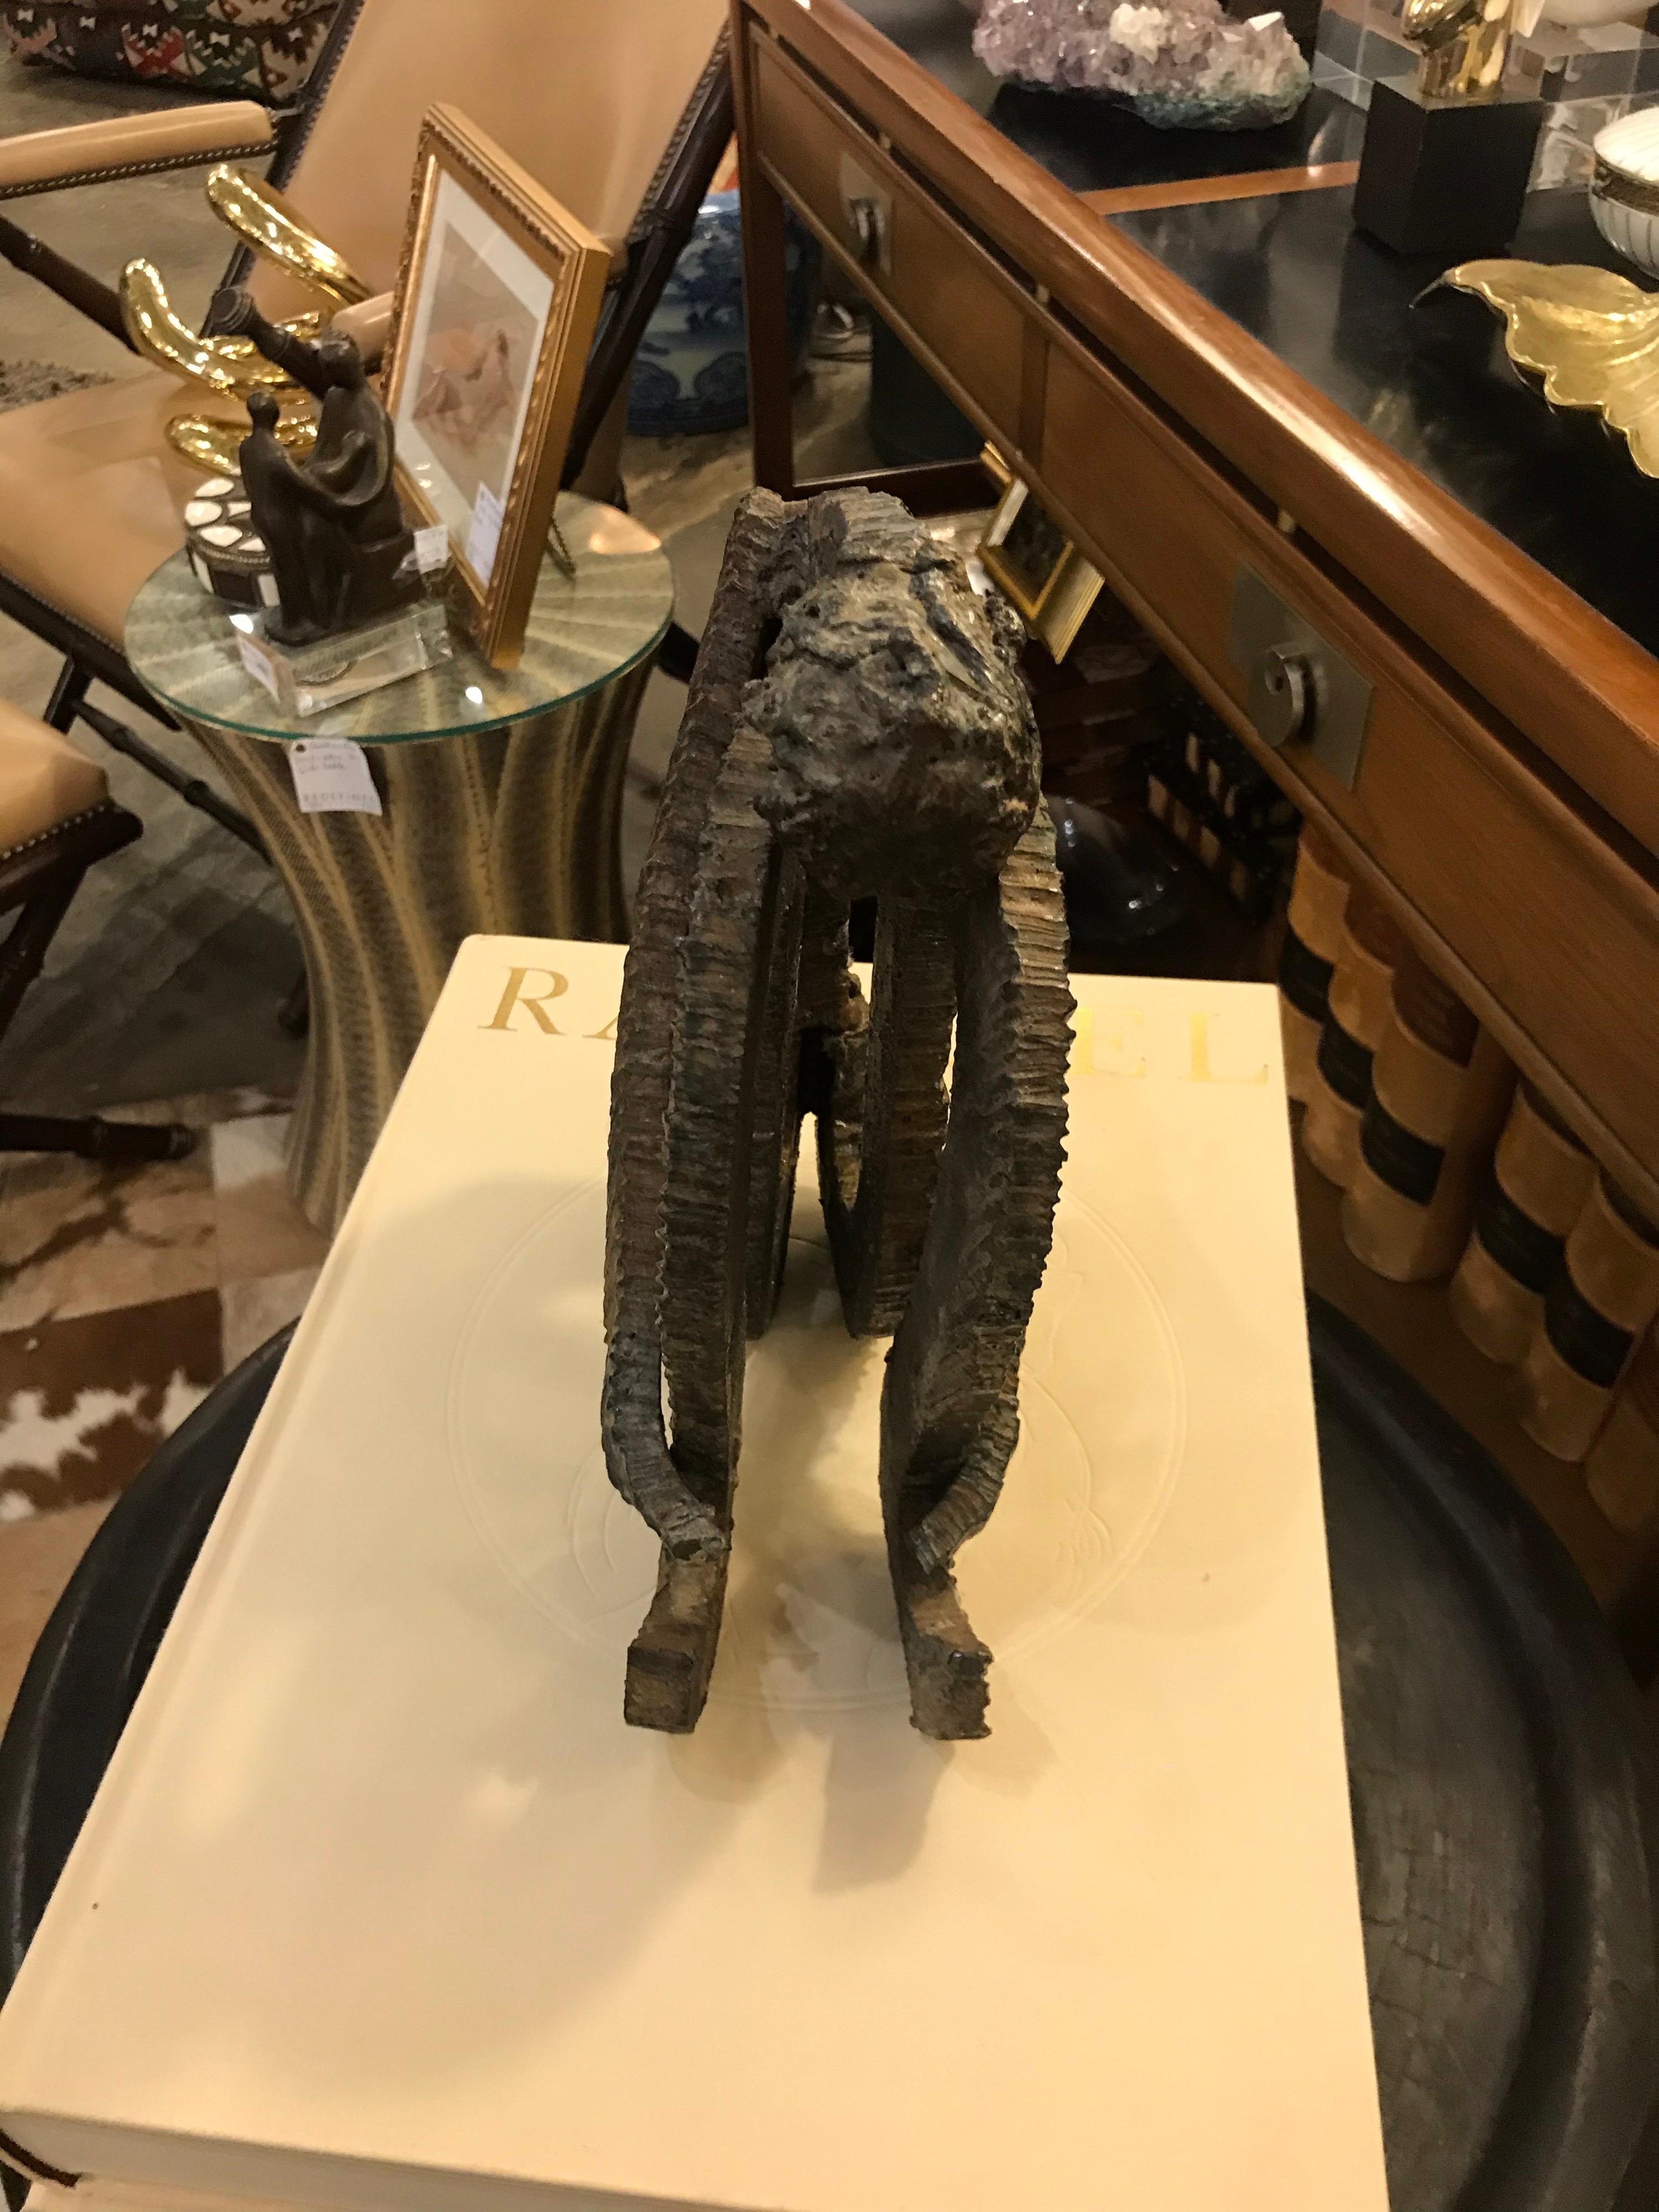 This is an iron corrugated textured abstract figure by the sculptor Arik Amir born in Tel Aviv in 1922 As an artist he started his own Artist colony where he sculpted with many other artists in the city of Safed.